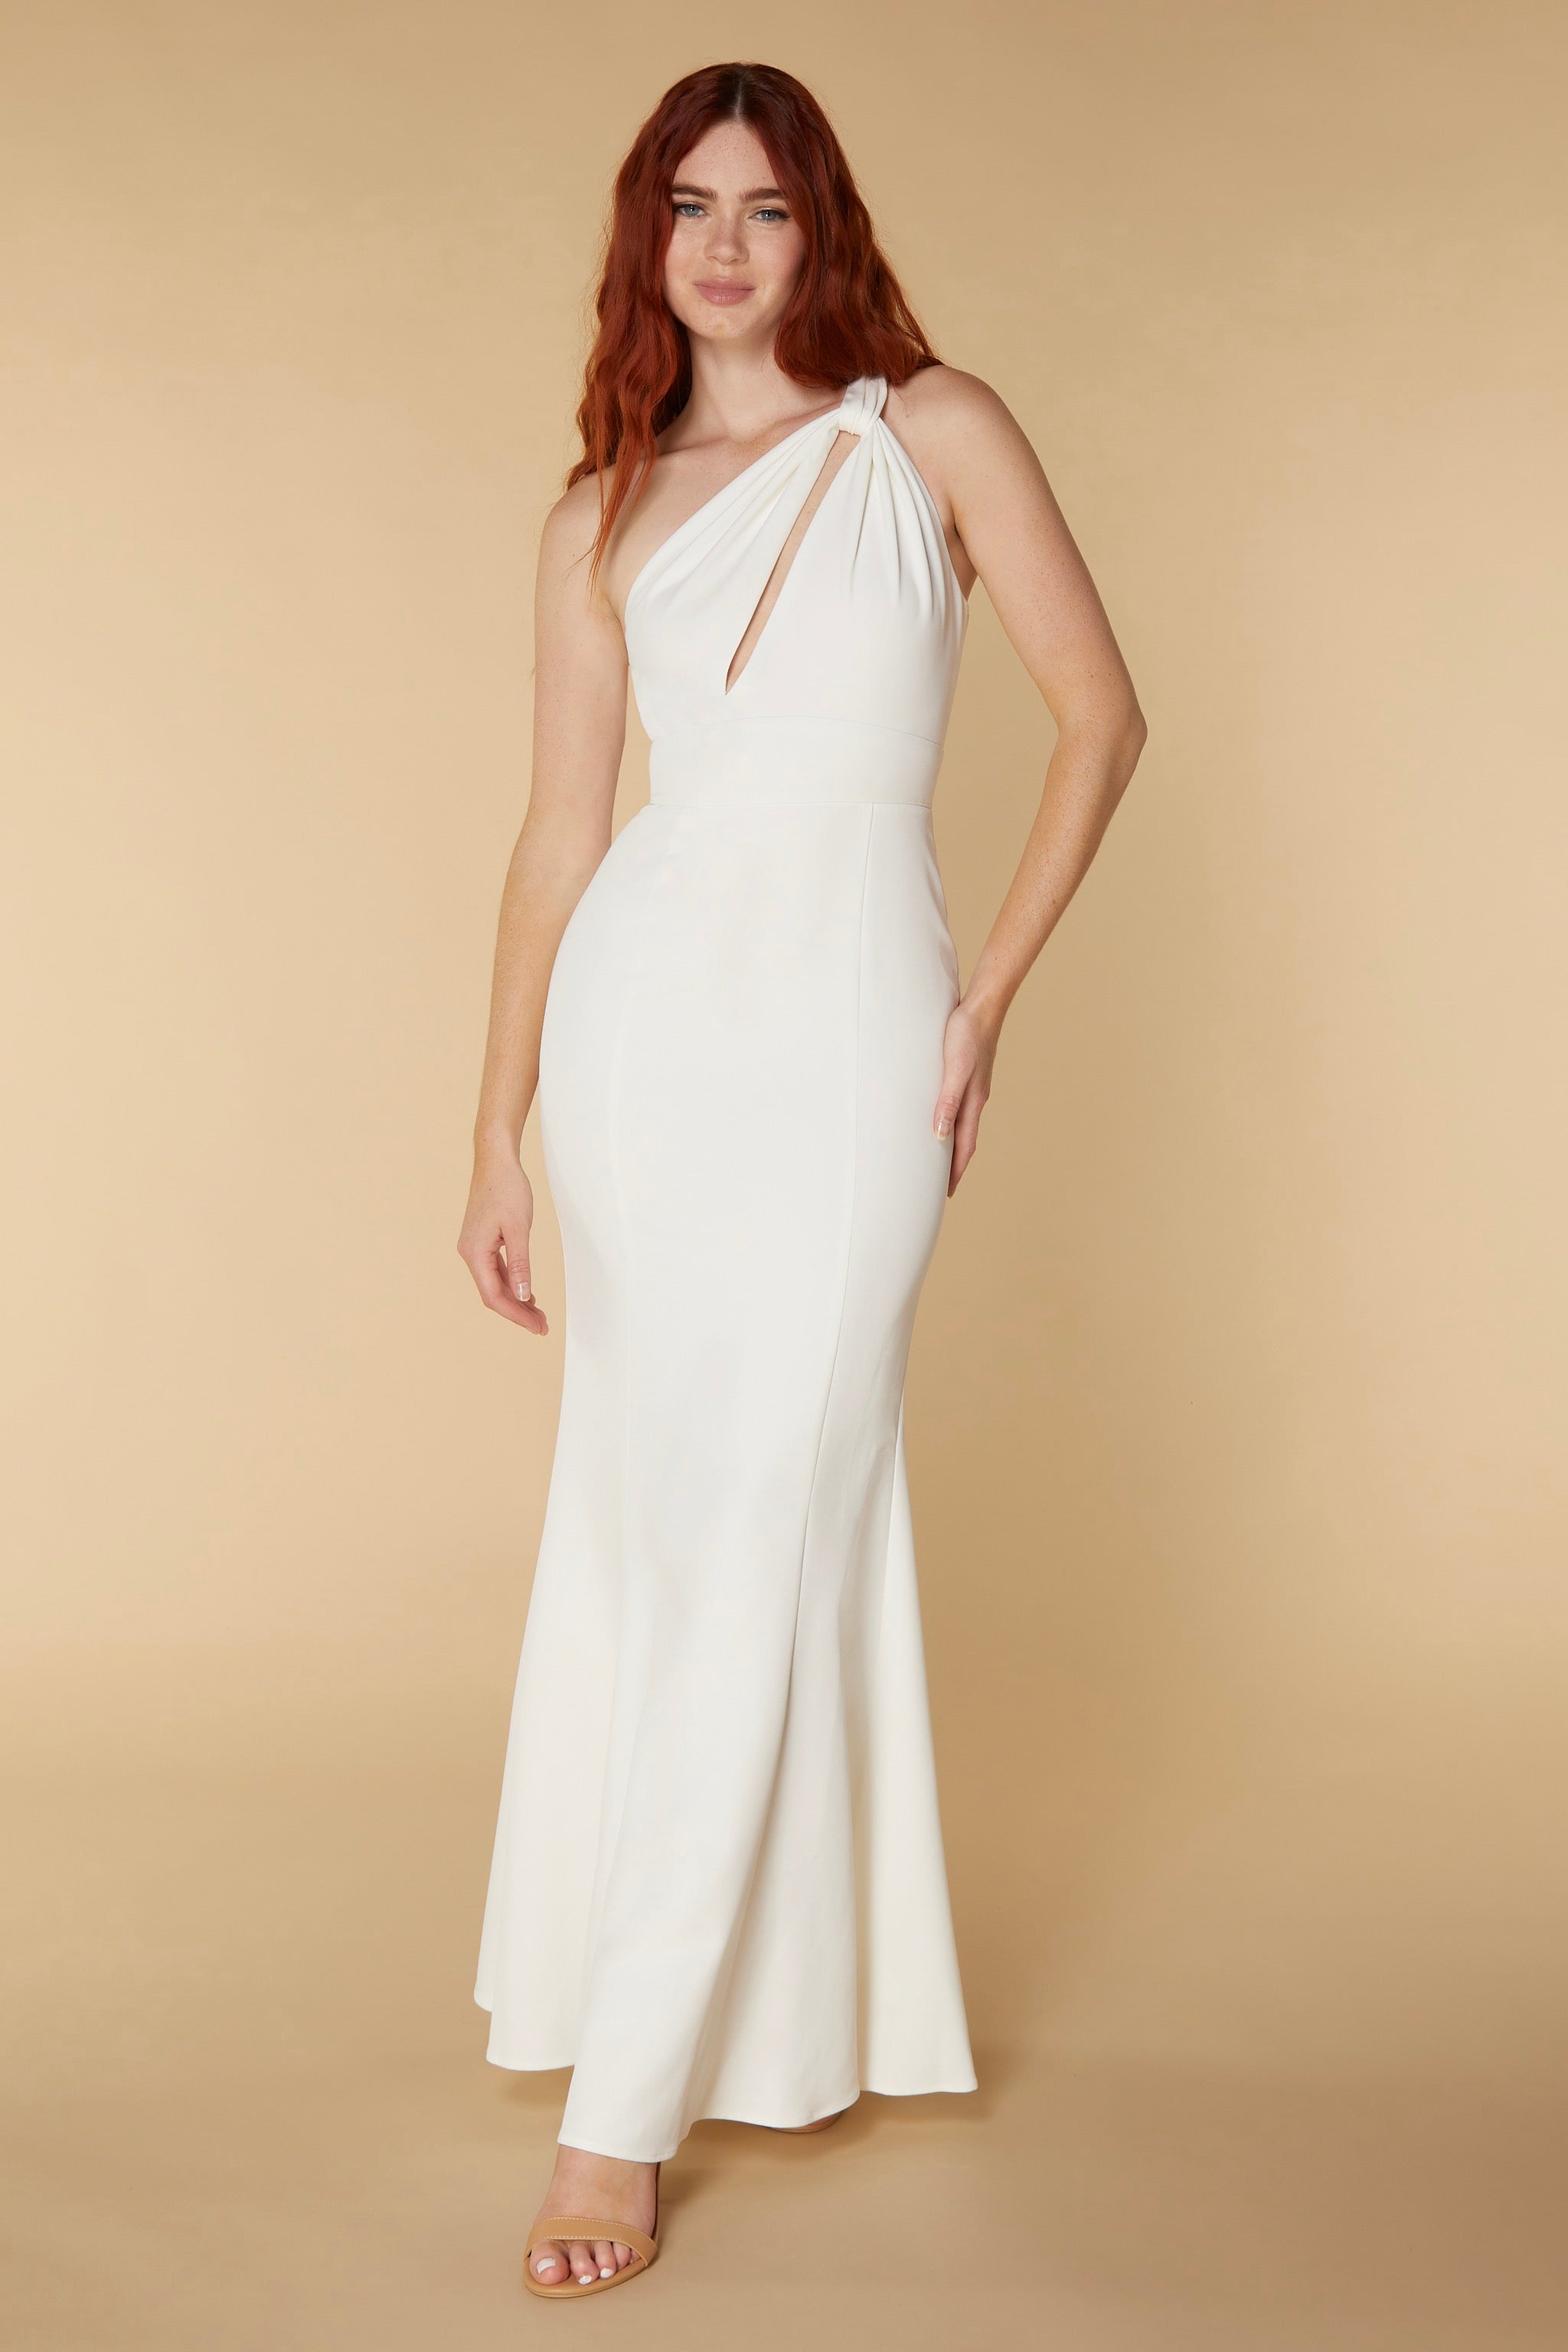 Zaria One Shoulder Fishtail Maxi with Cut Out Detail, UK 6 / US 2 / EU 34 / Ivory